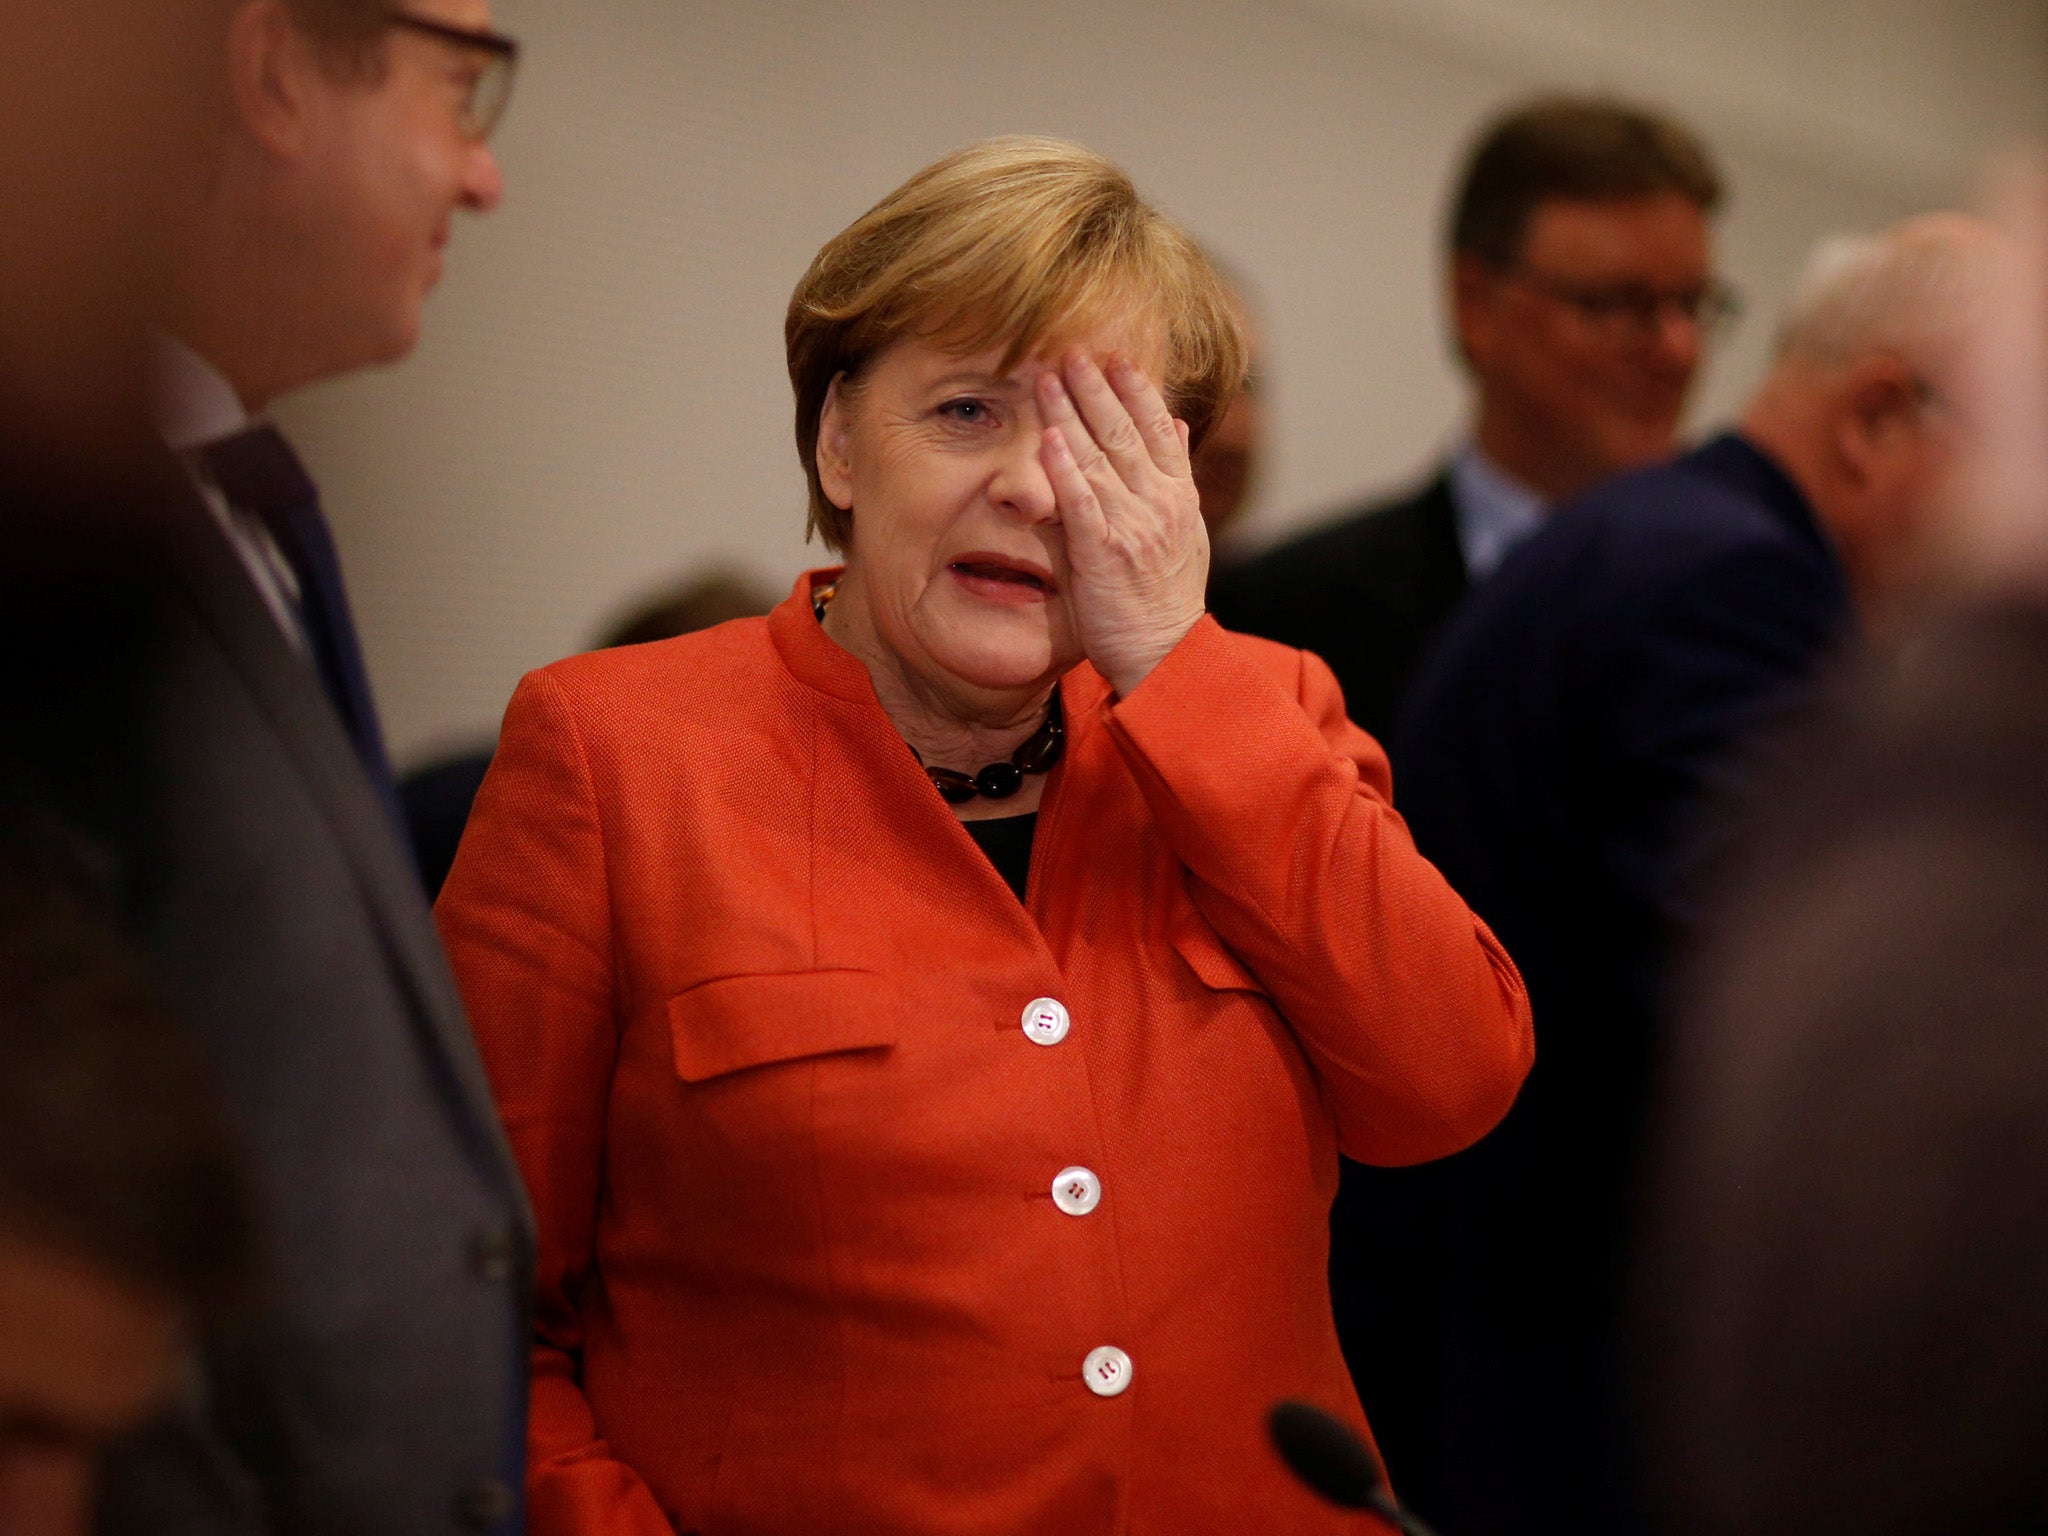 Angela Merkel said she would prefer another election rather than endure political stalemate